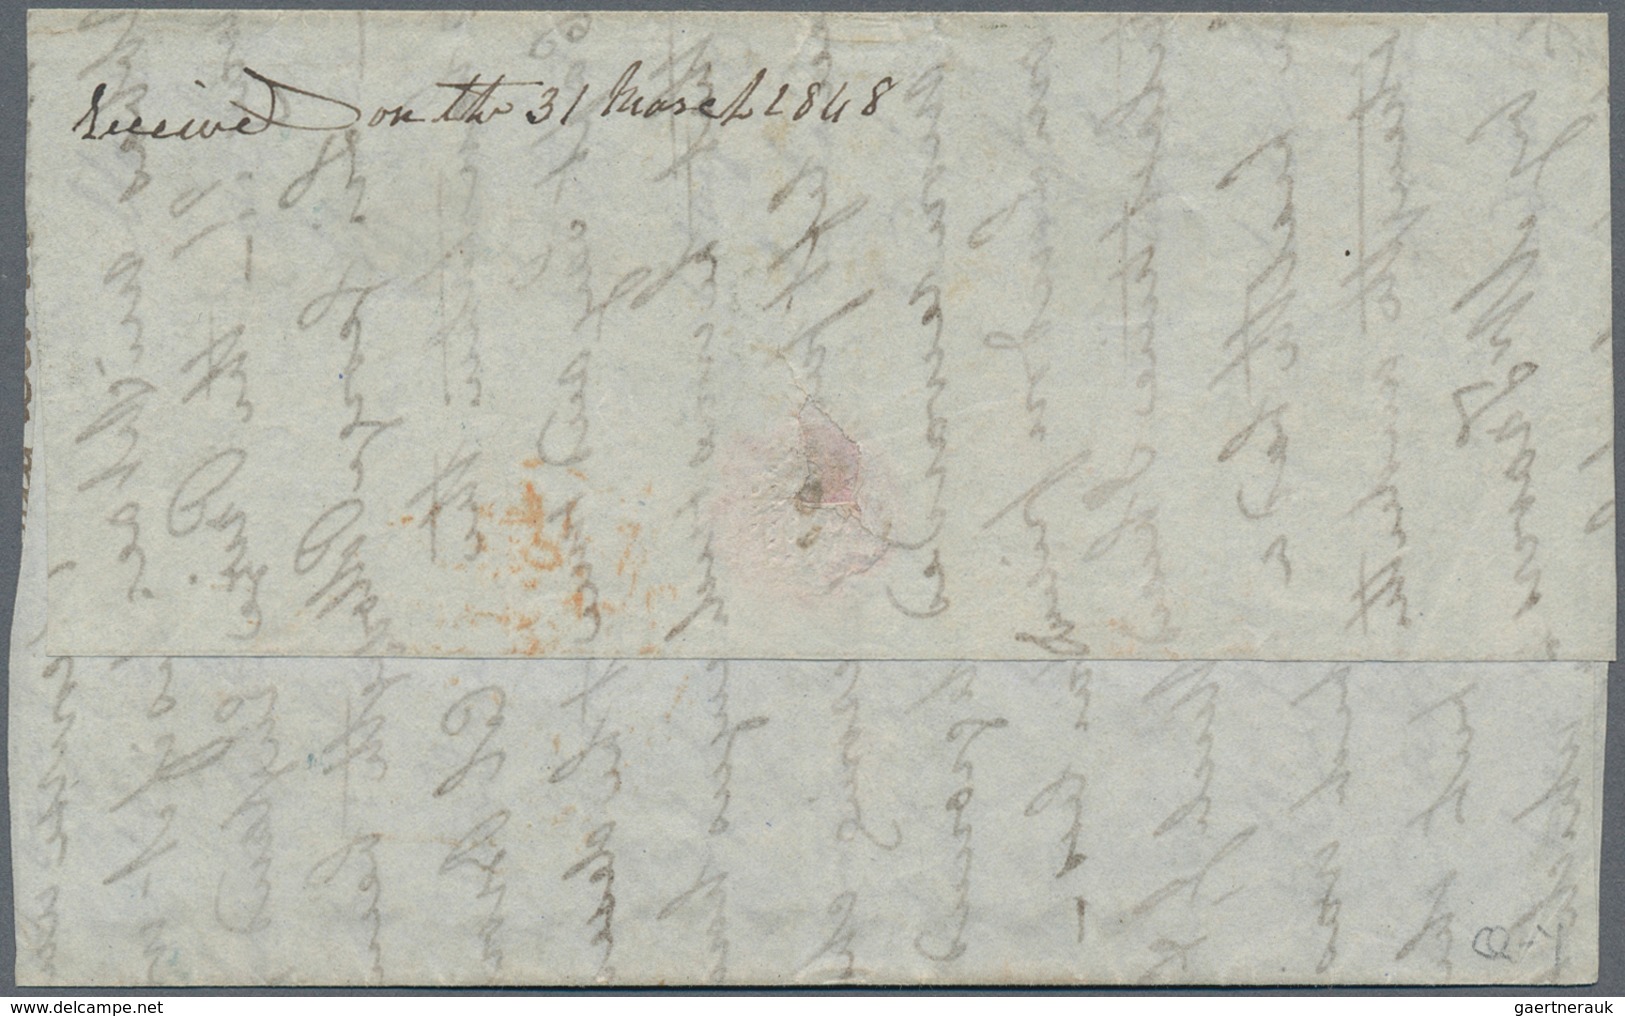 Aden: 1848 Part Of An Entire Posted At Leamington On 2nd March 1848, Addressed To A Passenger From C - Yémen